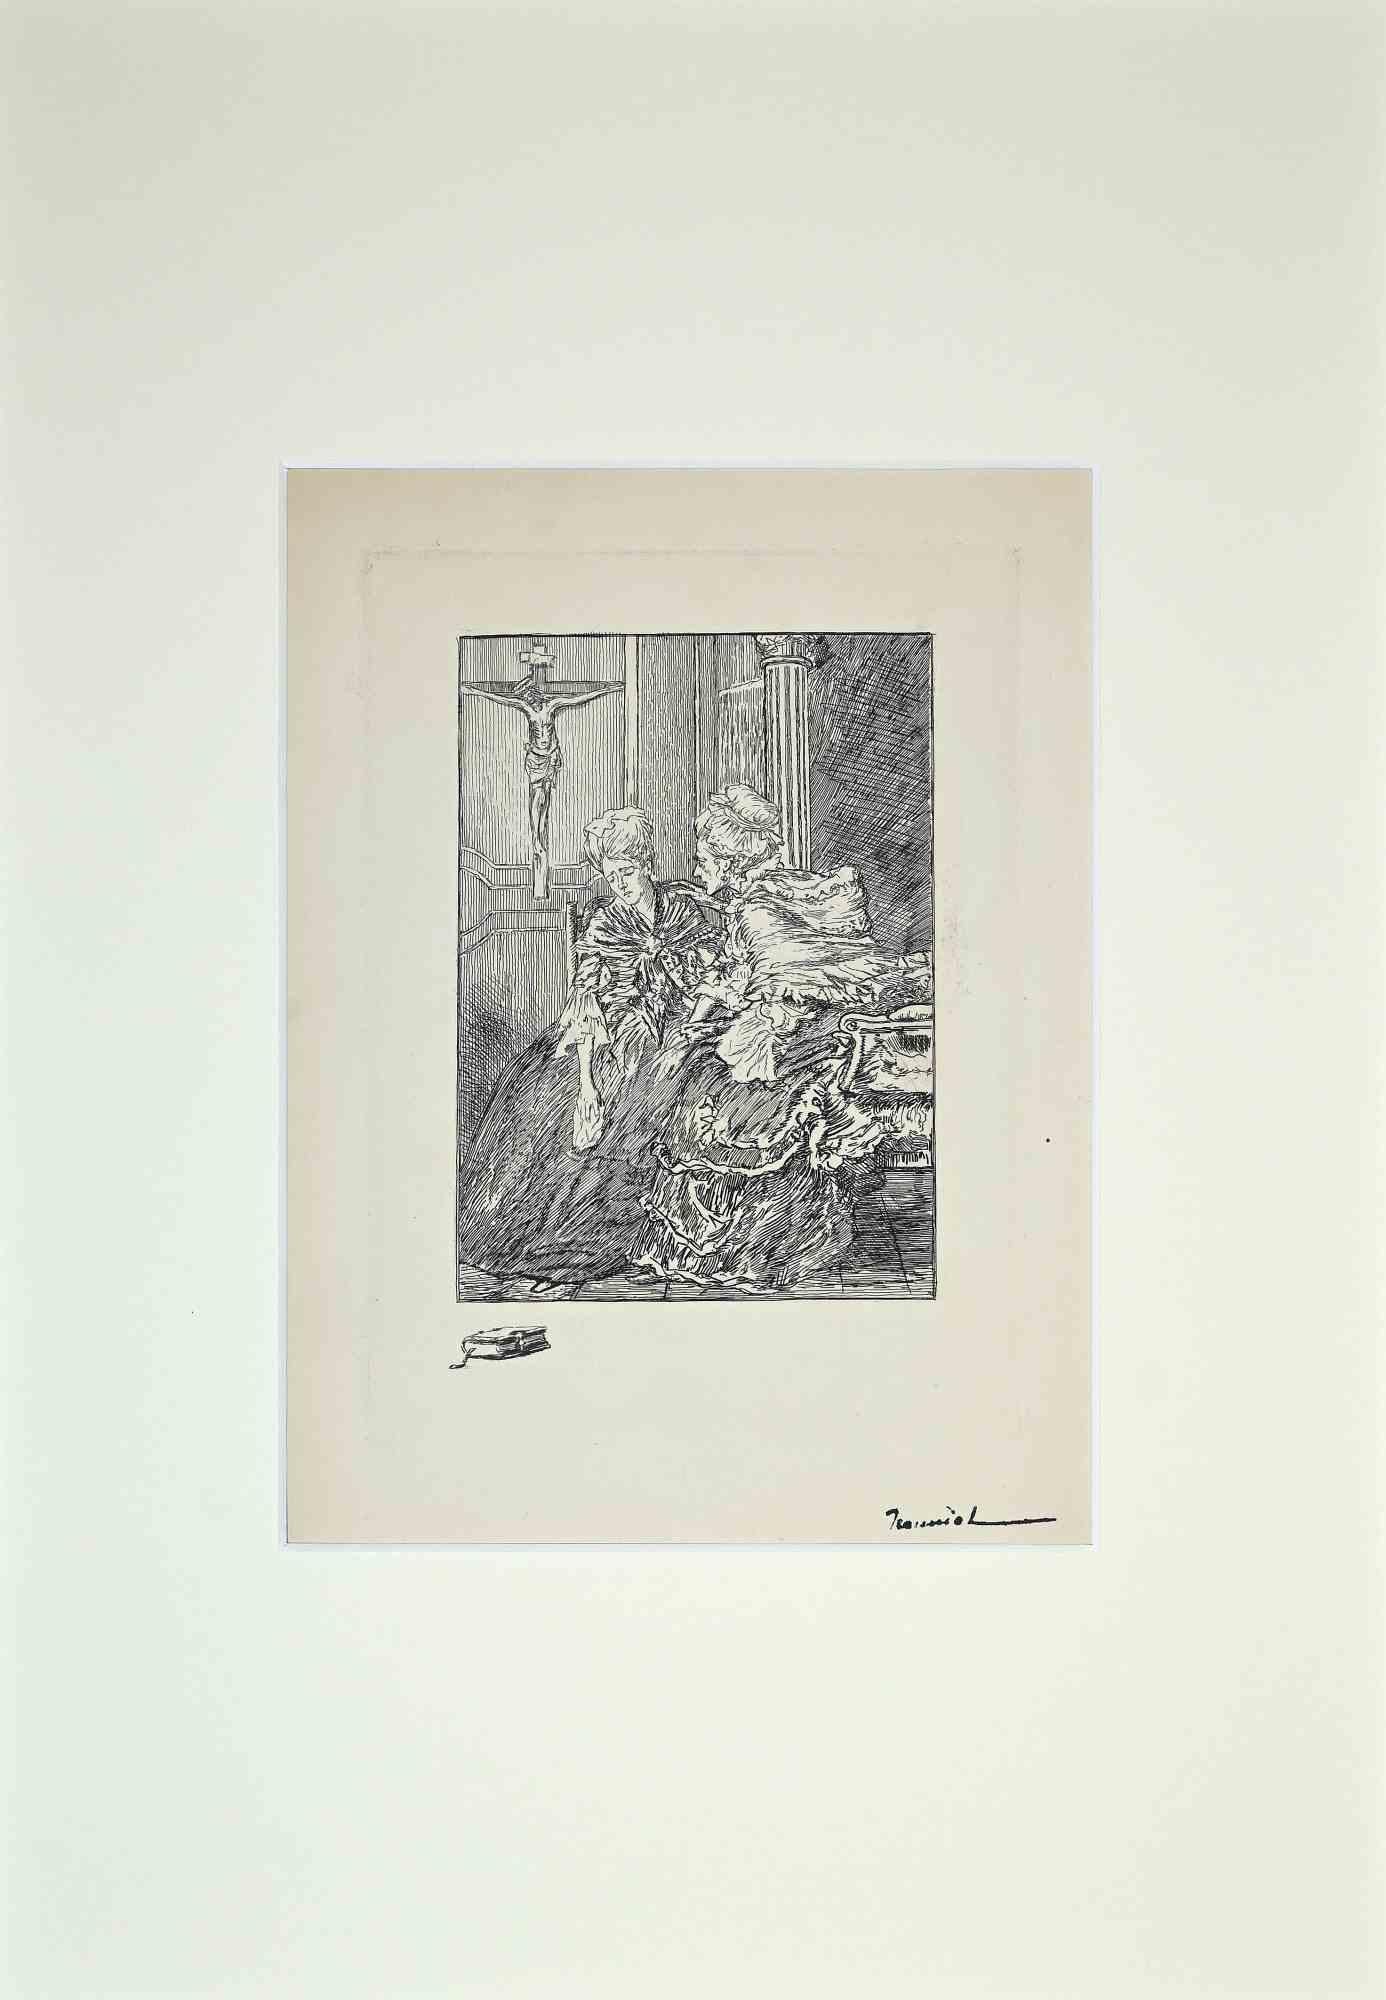 Pierre Georges Jeanniot Figurative Print - The Life of Casanova 4  - Etching by G. Jeanniot - Early 20th Century